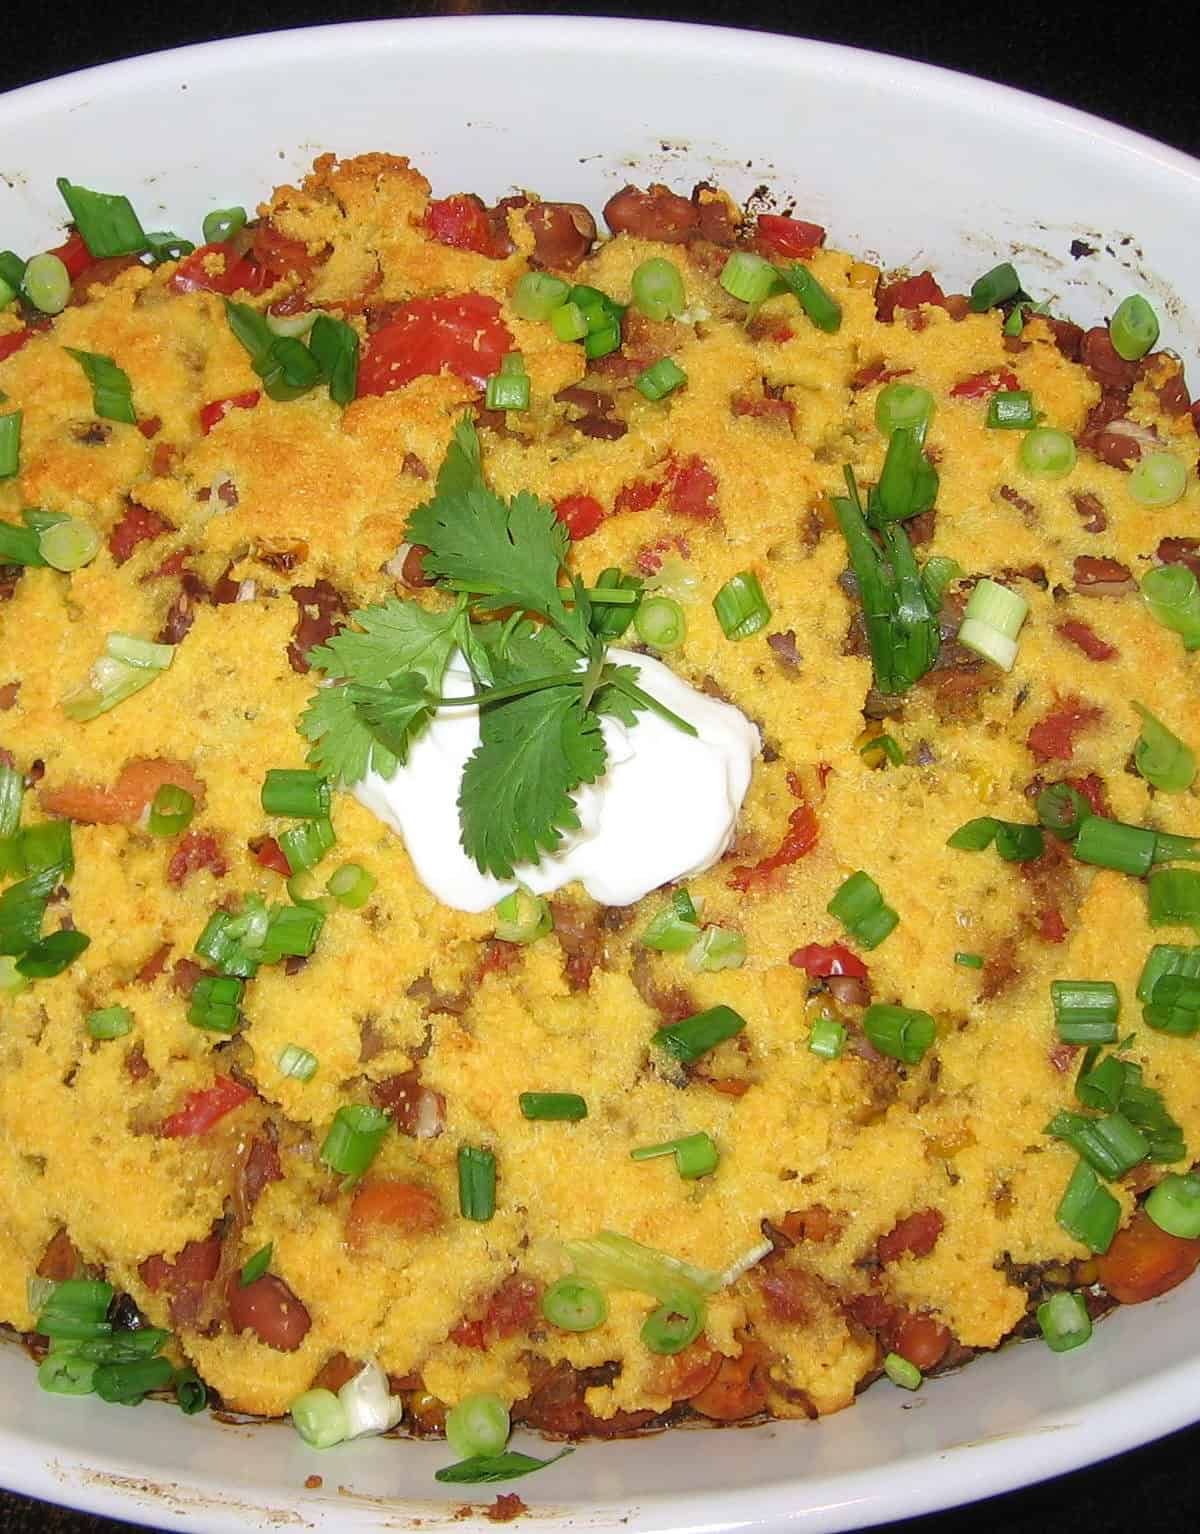 Mouth-watering Tamale Pie Recipe for Food Lovers